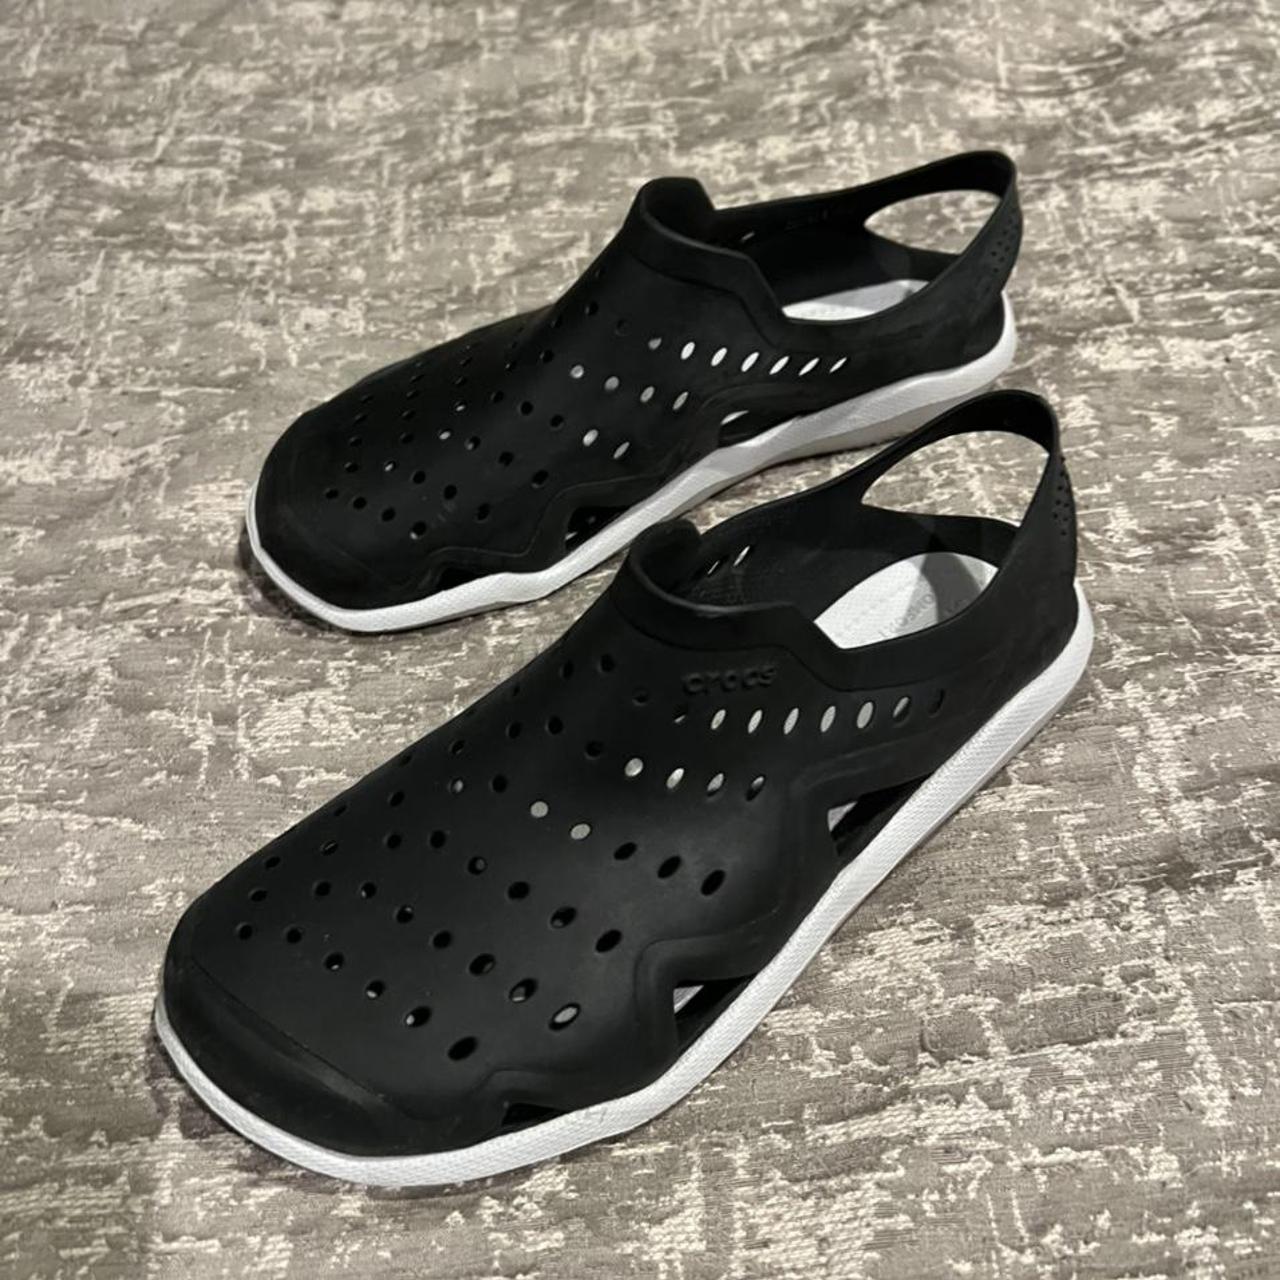 Product Image 2 - Mens size 6 crocs

Worn once

Perfect